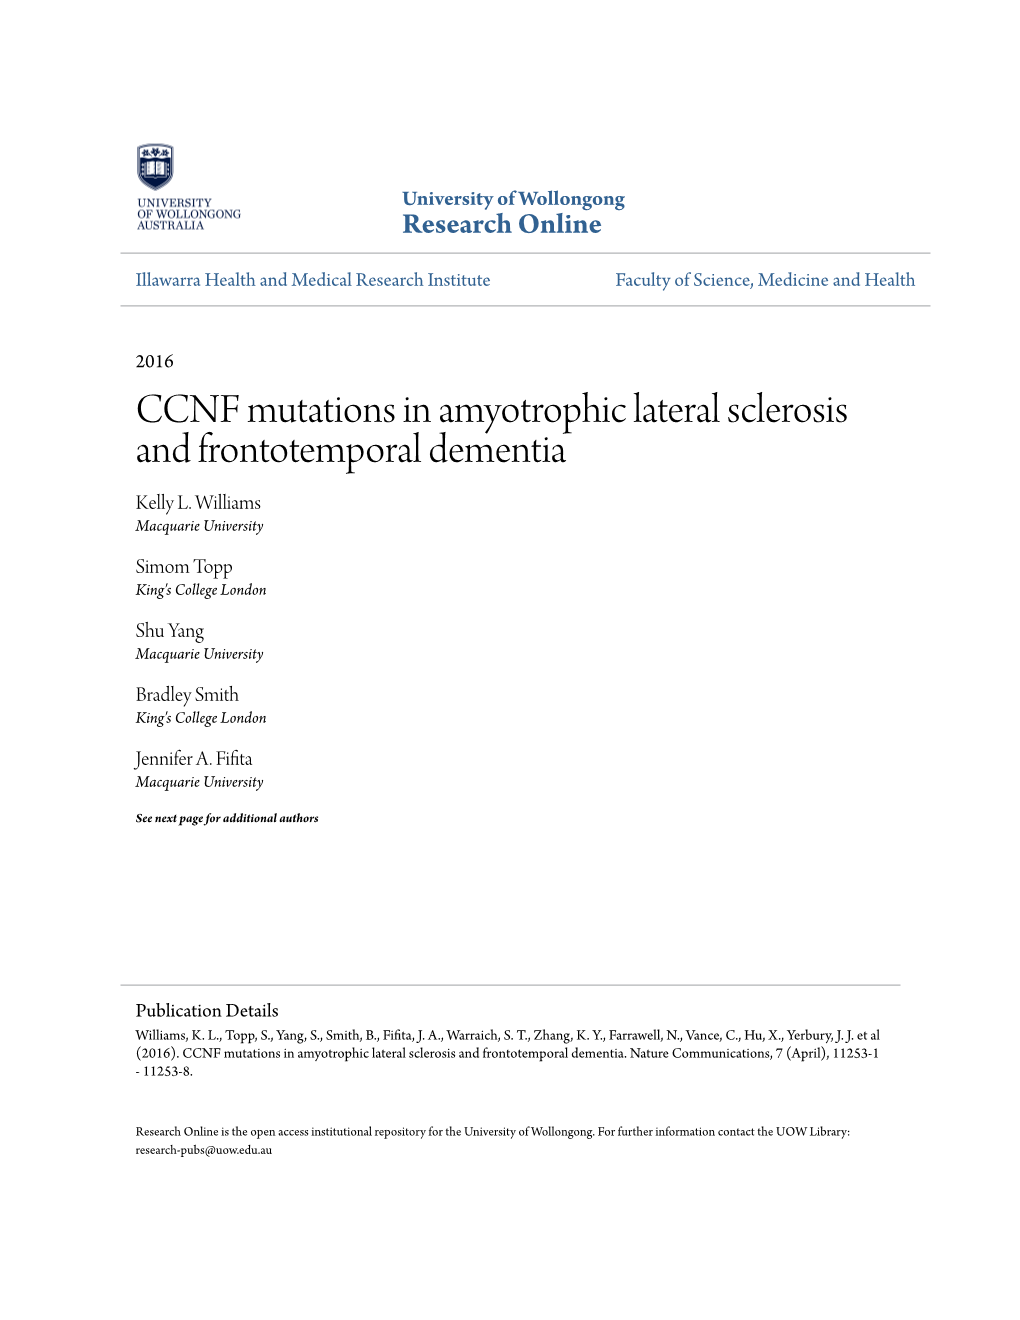 CCNF Mutations in Amyotrophic Lateral Sclerosis and Frontotemporal Dementia Kelly L